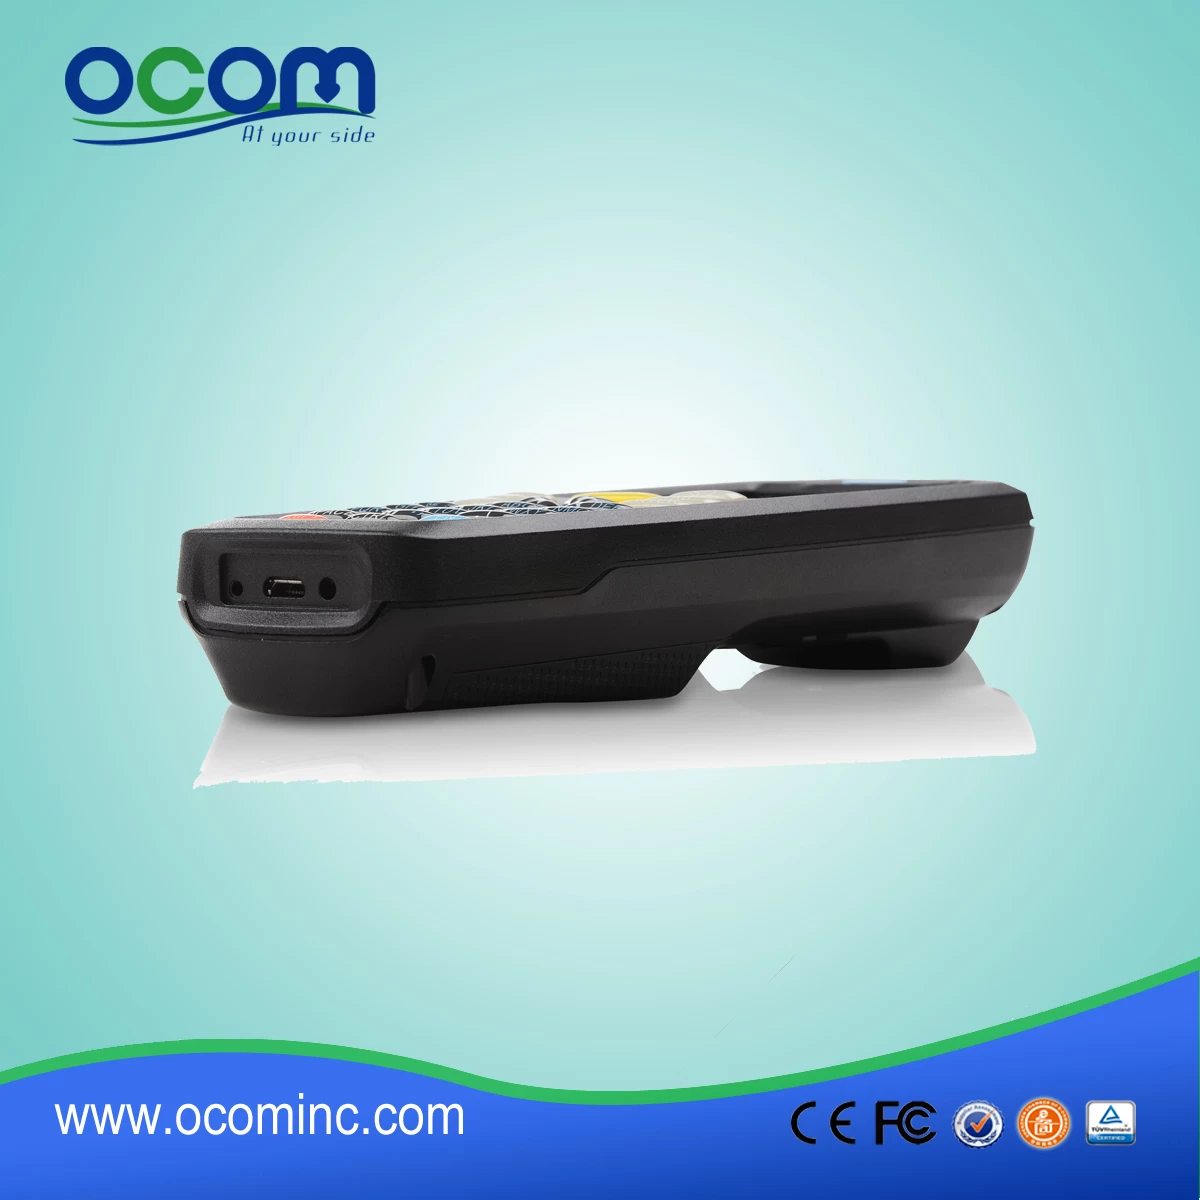 Low cost and portable Data collector-OCBS-D6000